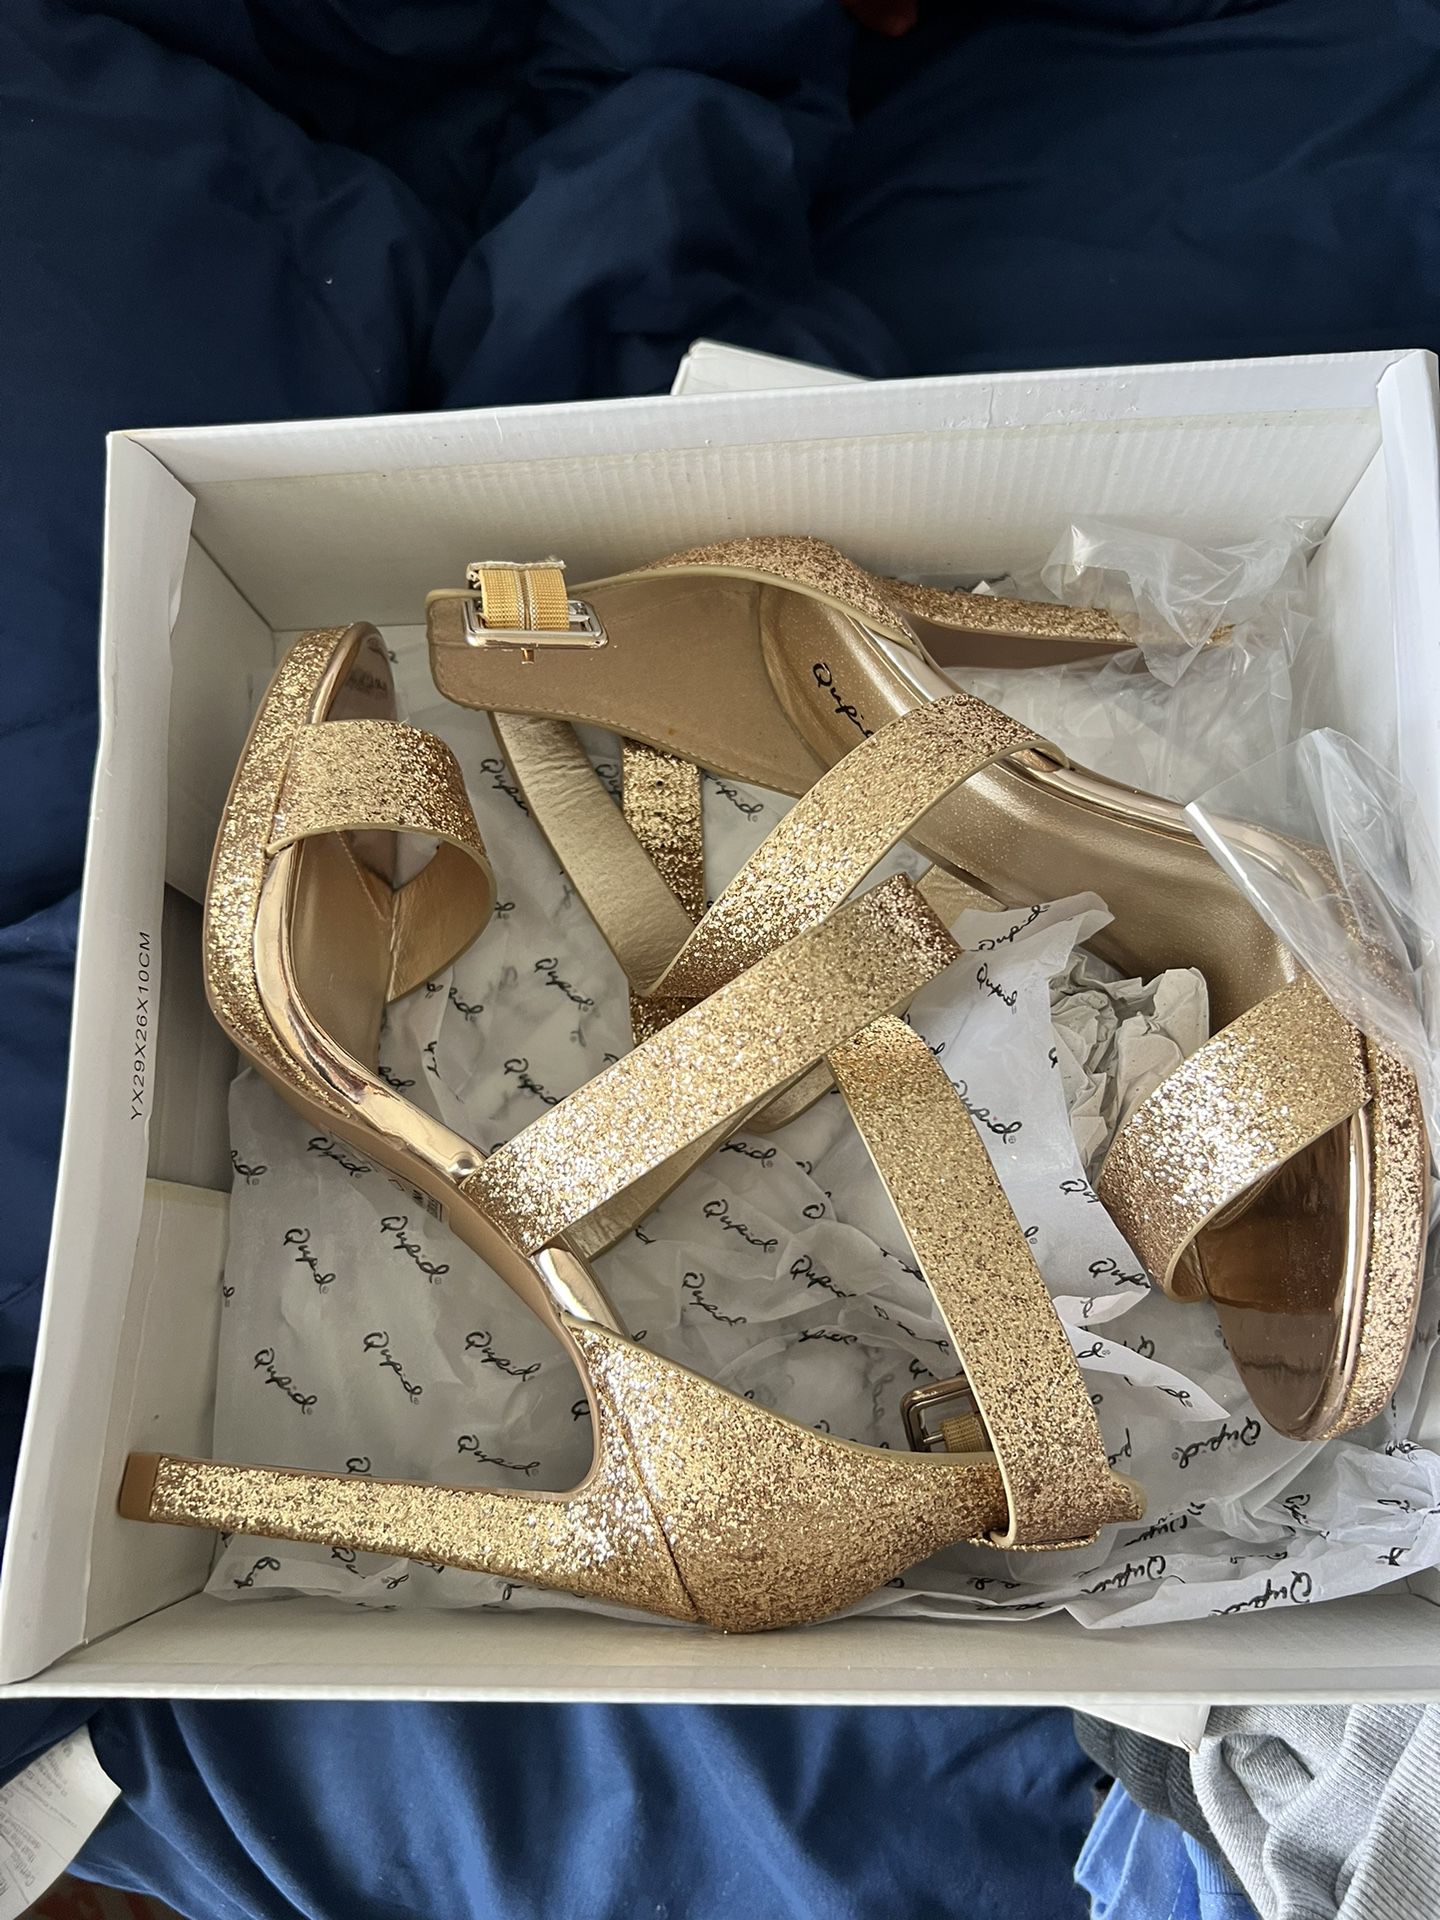 Gold Heels Size 8.5